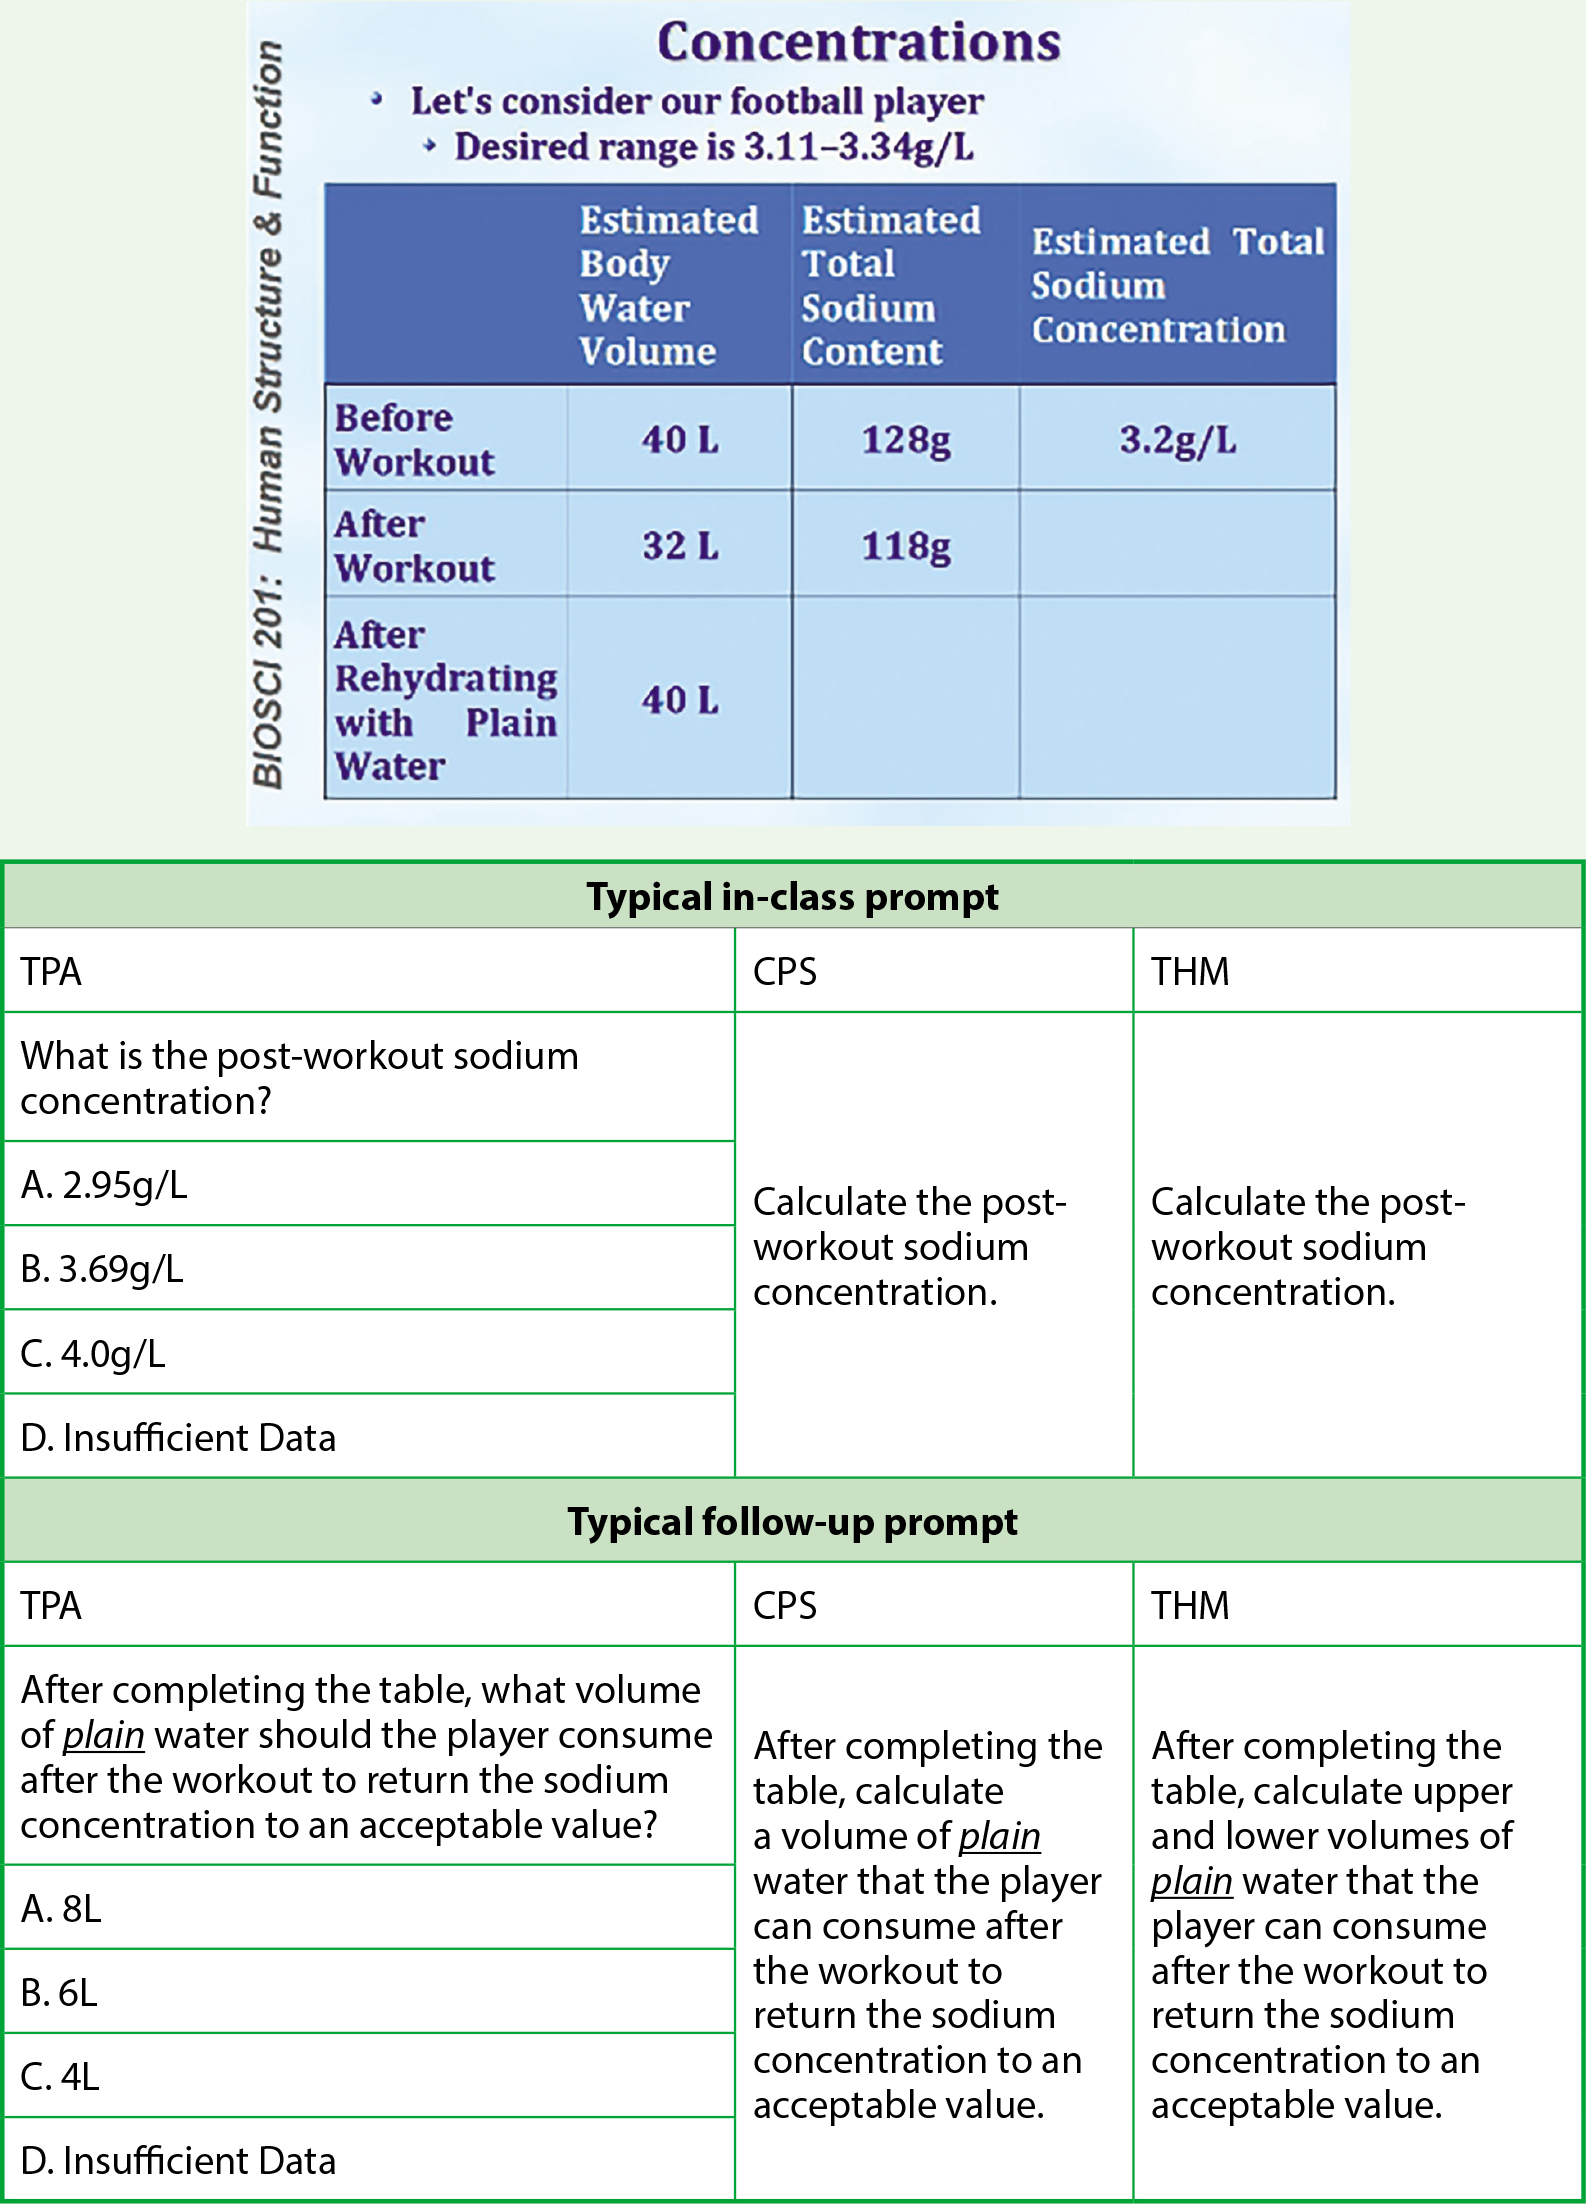 Typical prompts for the three different SRS (student response systems) when postworkout overhydration problem is presented as an in-class series on sodium concentrations in the body fluids of football players after a 4-hour workout. TPA (Turning Point Any